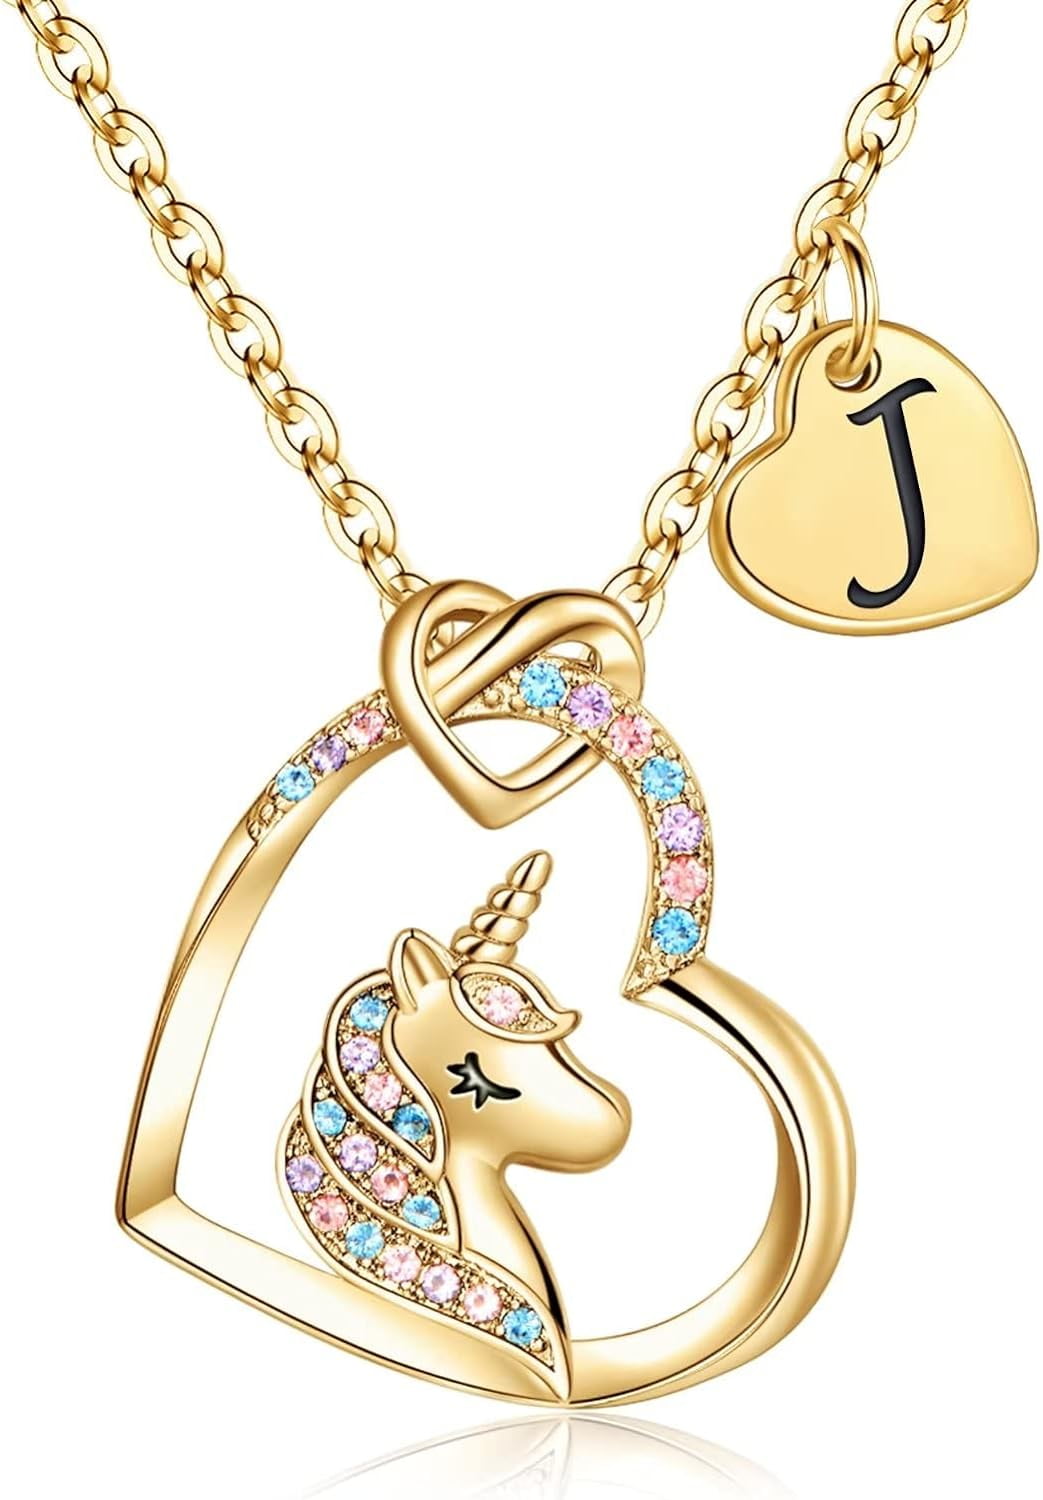 Hidepoo Unicorn Gifts for Girls - 14K Gold/White Gold/Rose Gold Plated ...